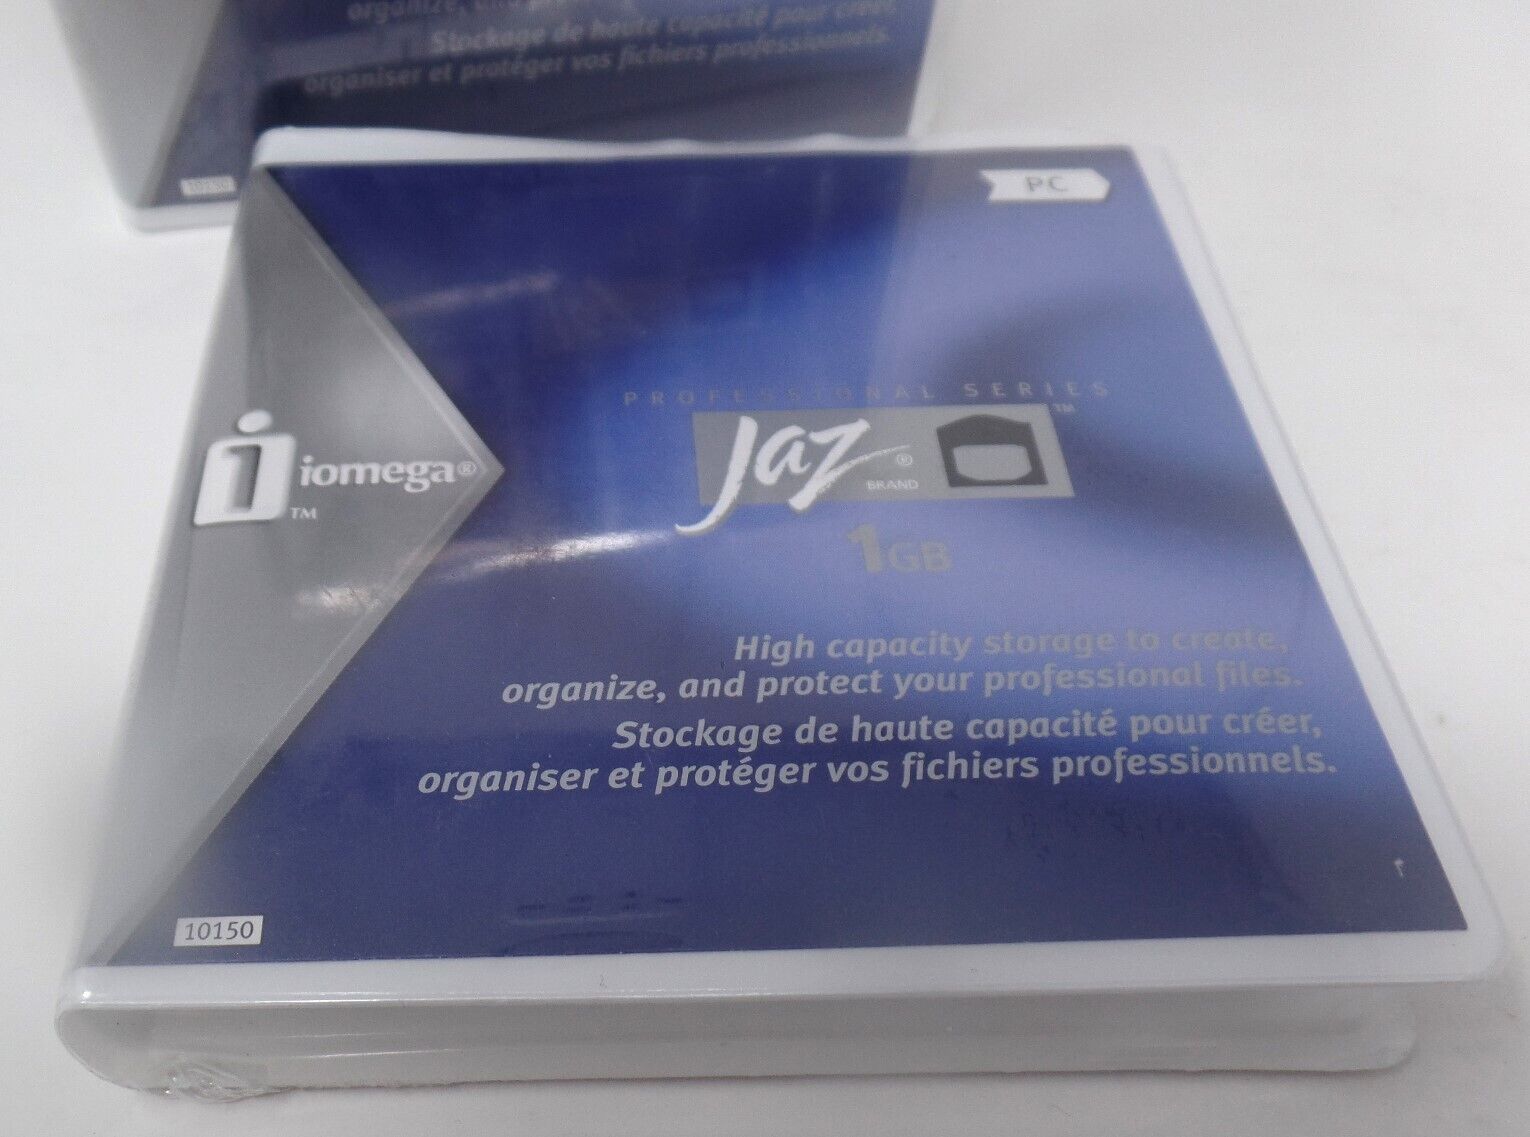 New Sealed IOMEGA Jaz 1GB disks PC Formatted Professional Series